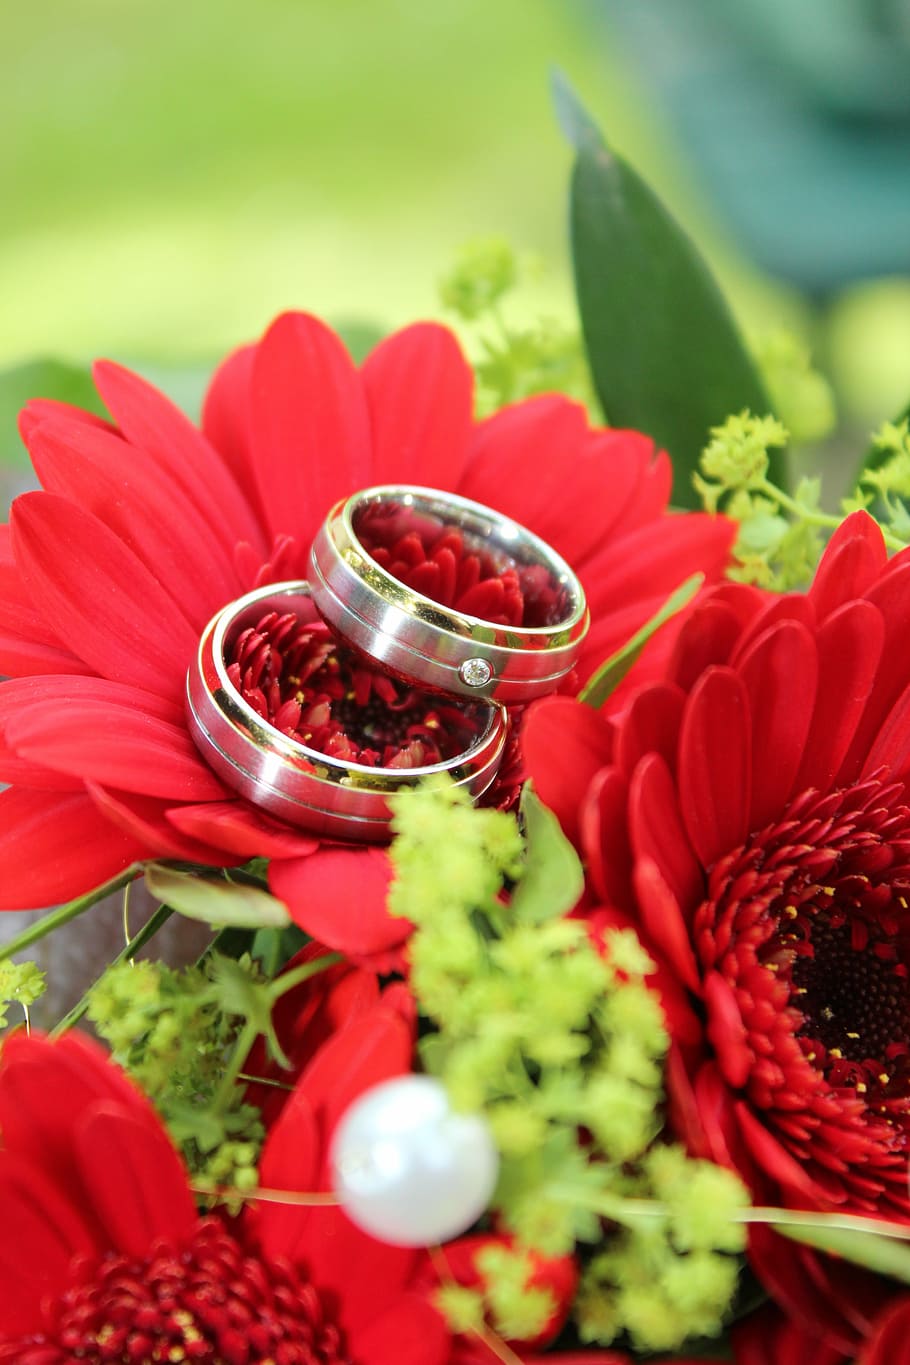 silver-colored bridal band rings on red Gerbera daisy flower